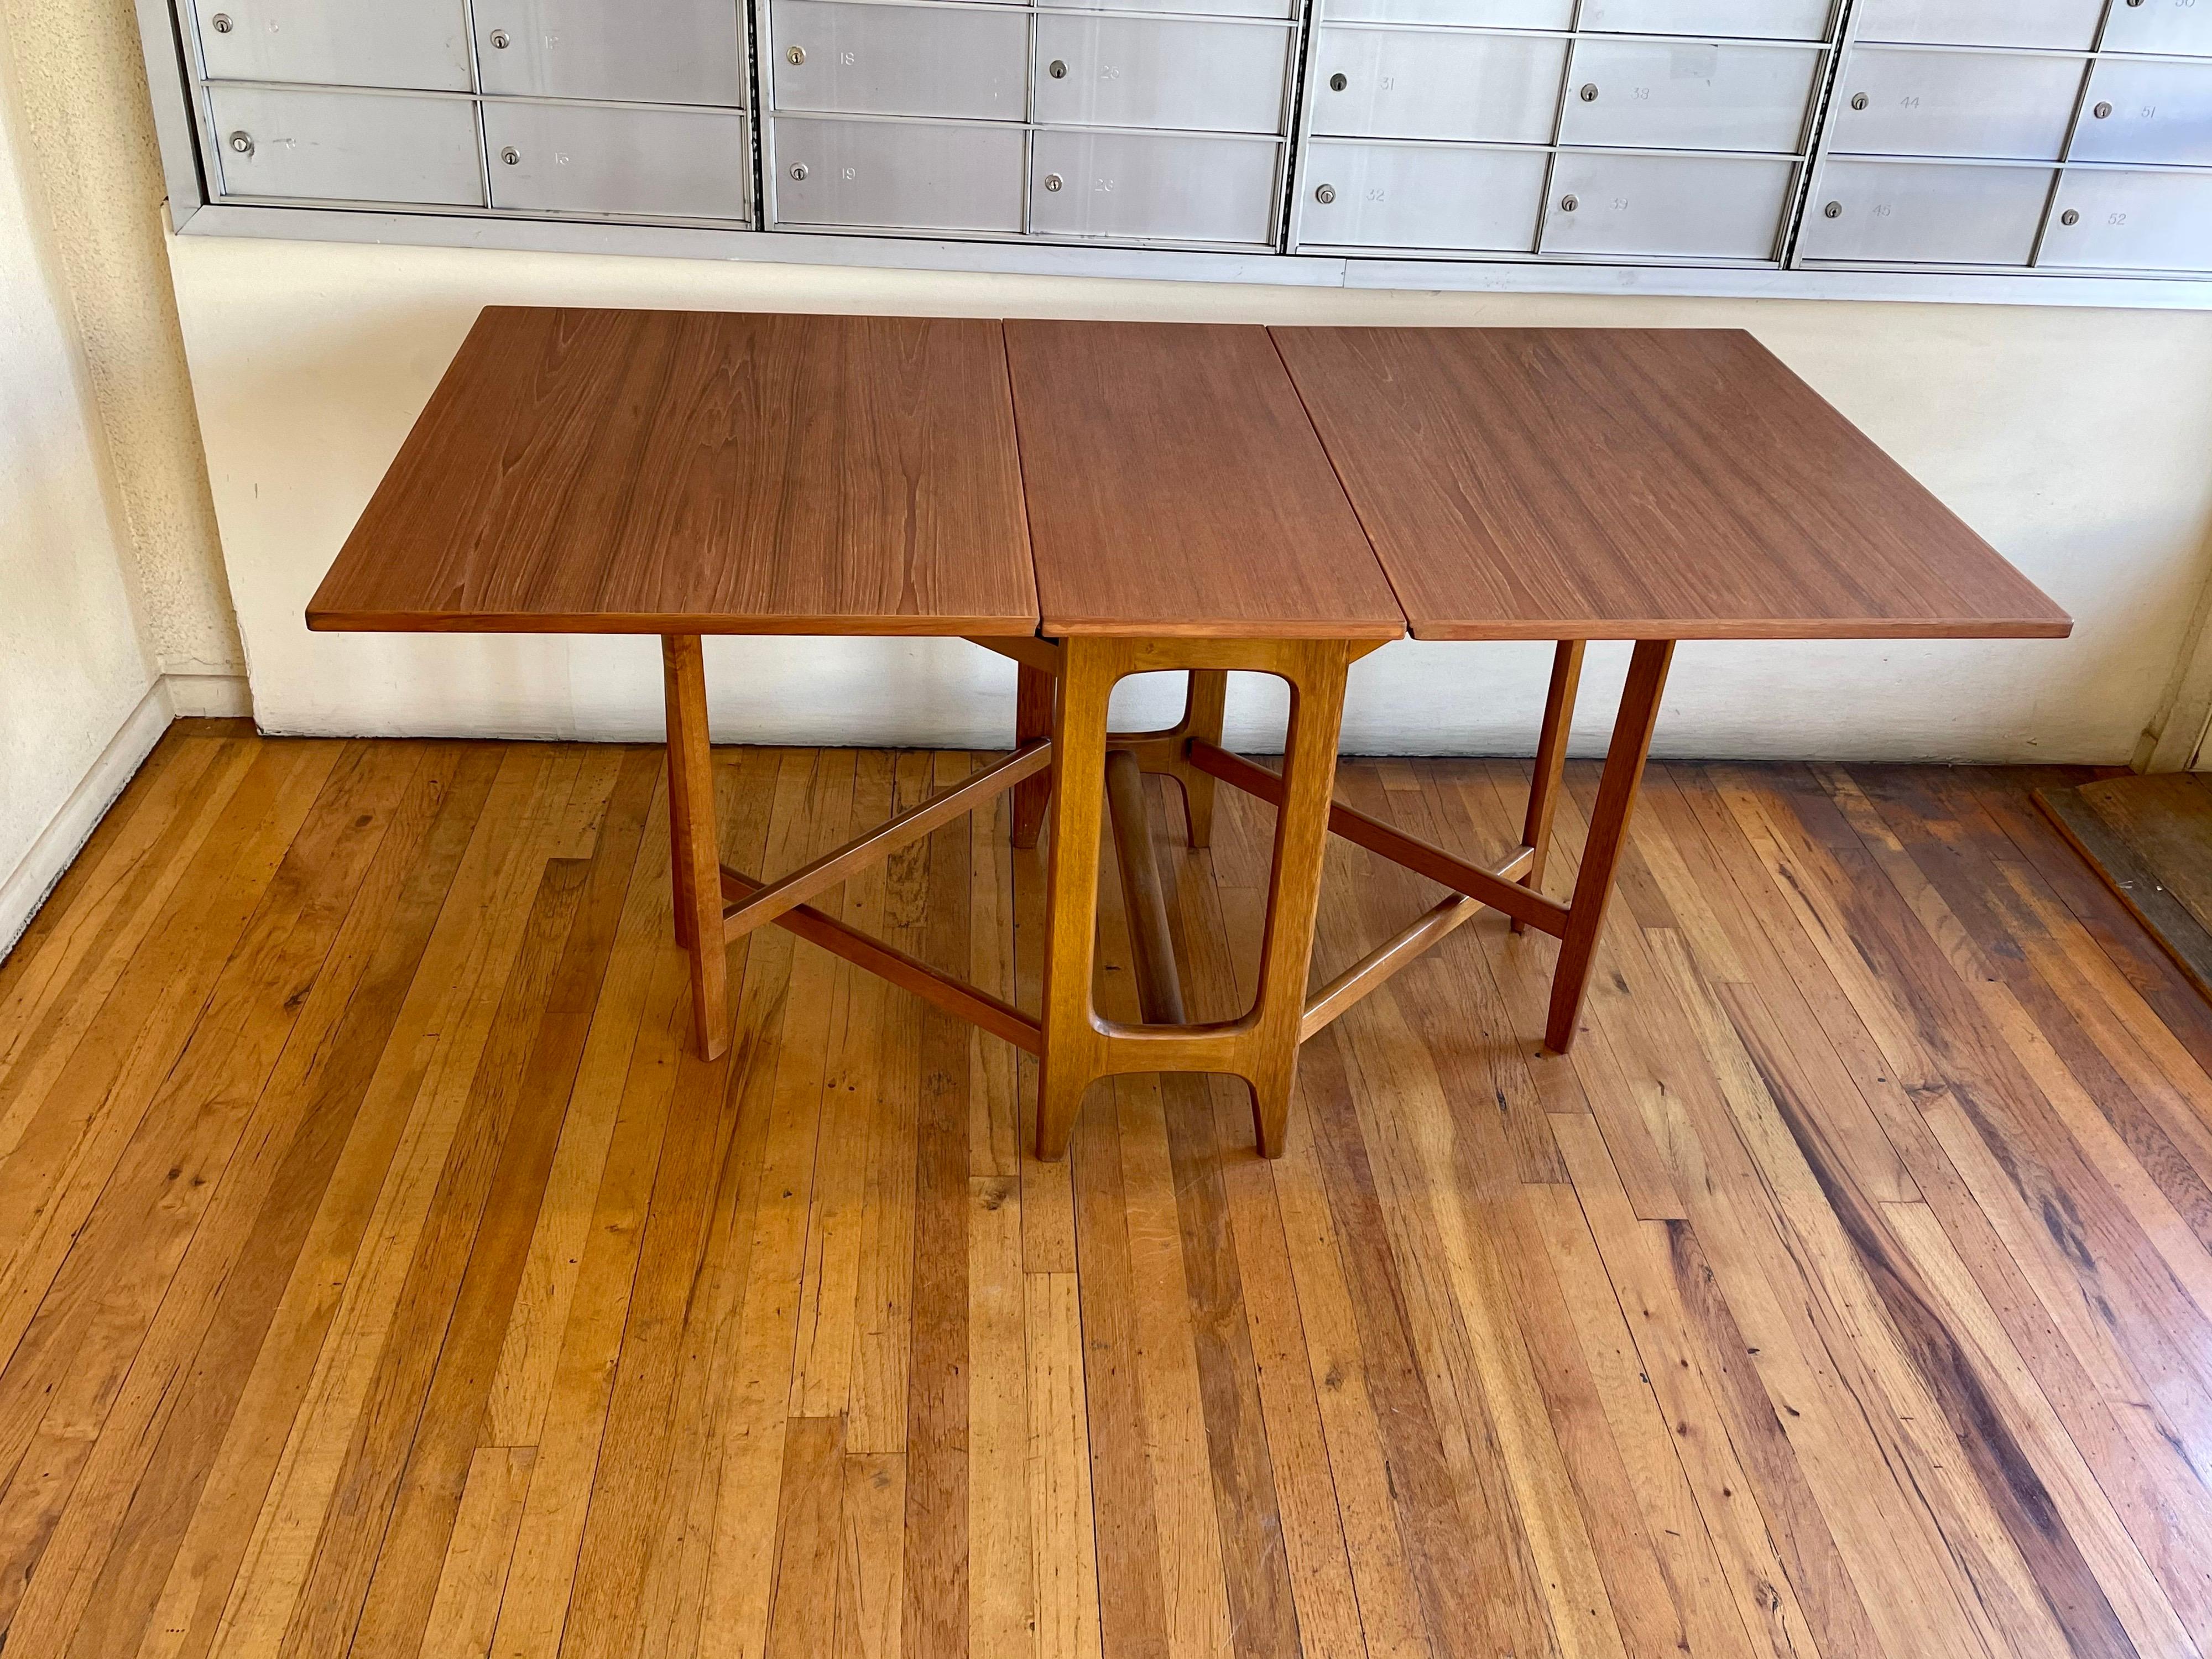 This drop-leaf dining table, teak top freshly refinished with a beechwood base, versatile and practical it can be used behind a sofa or with just one side open. The table with one leaf open its 38.5